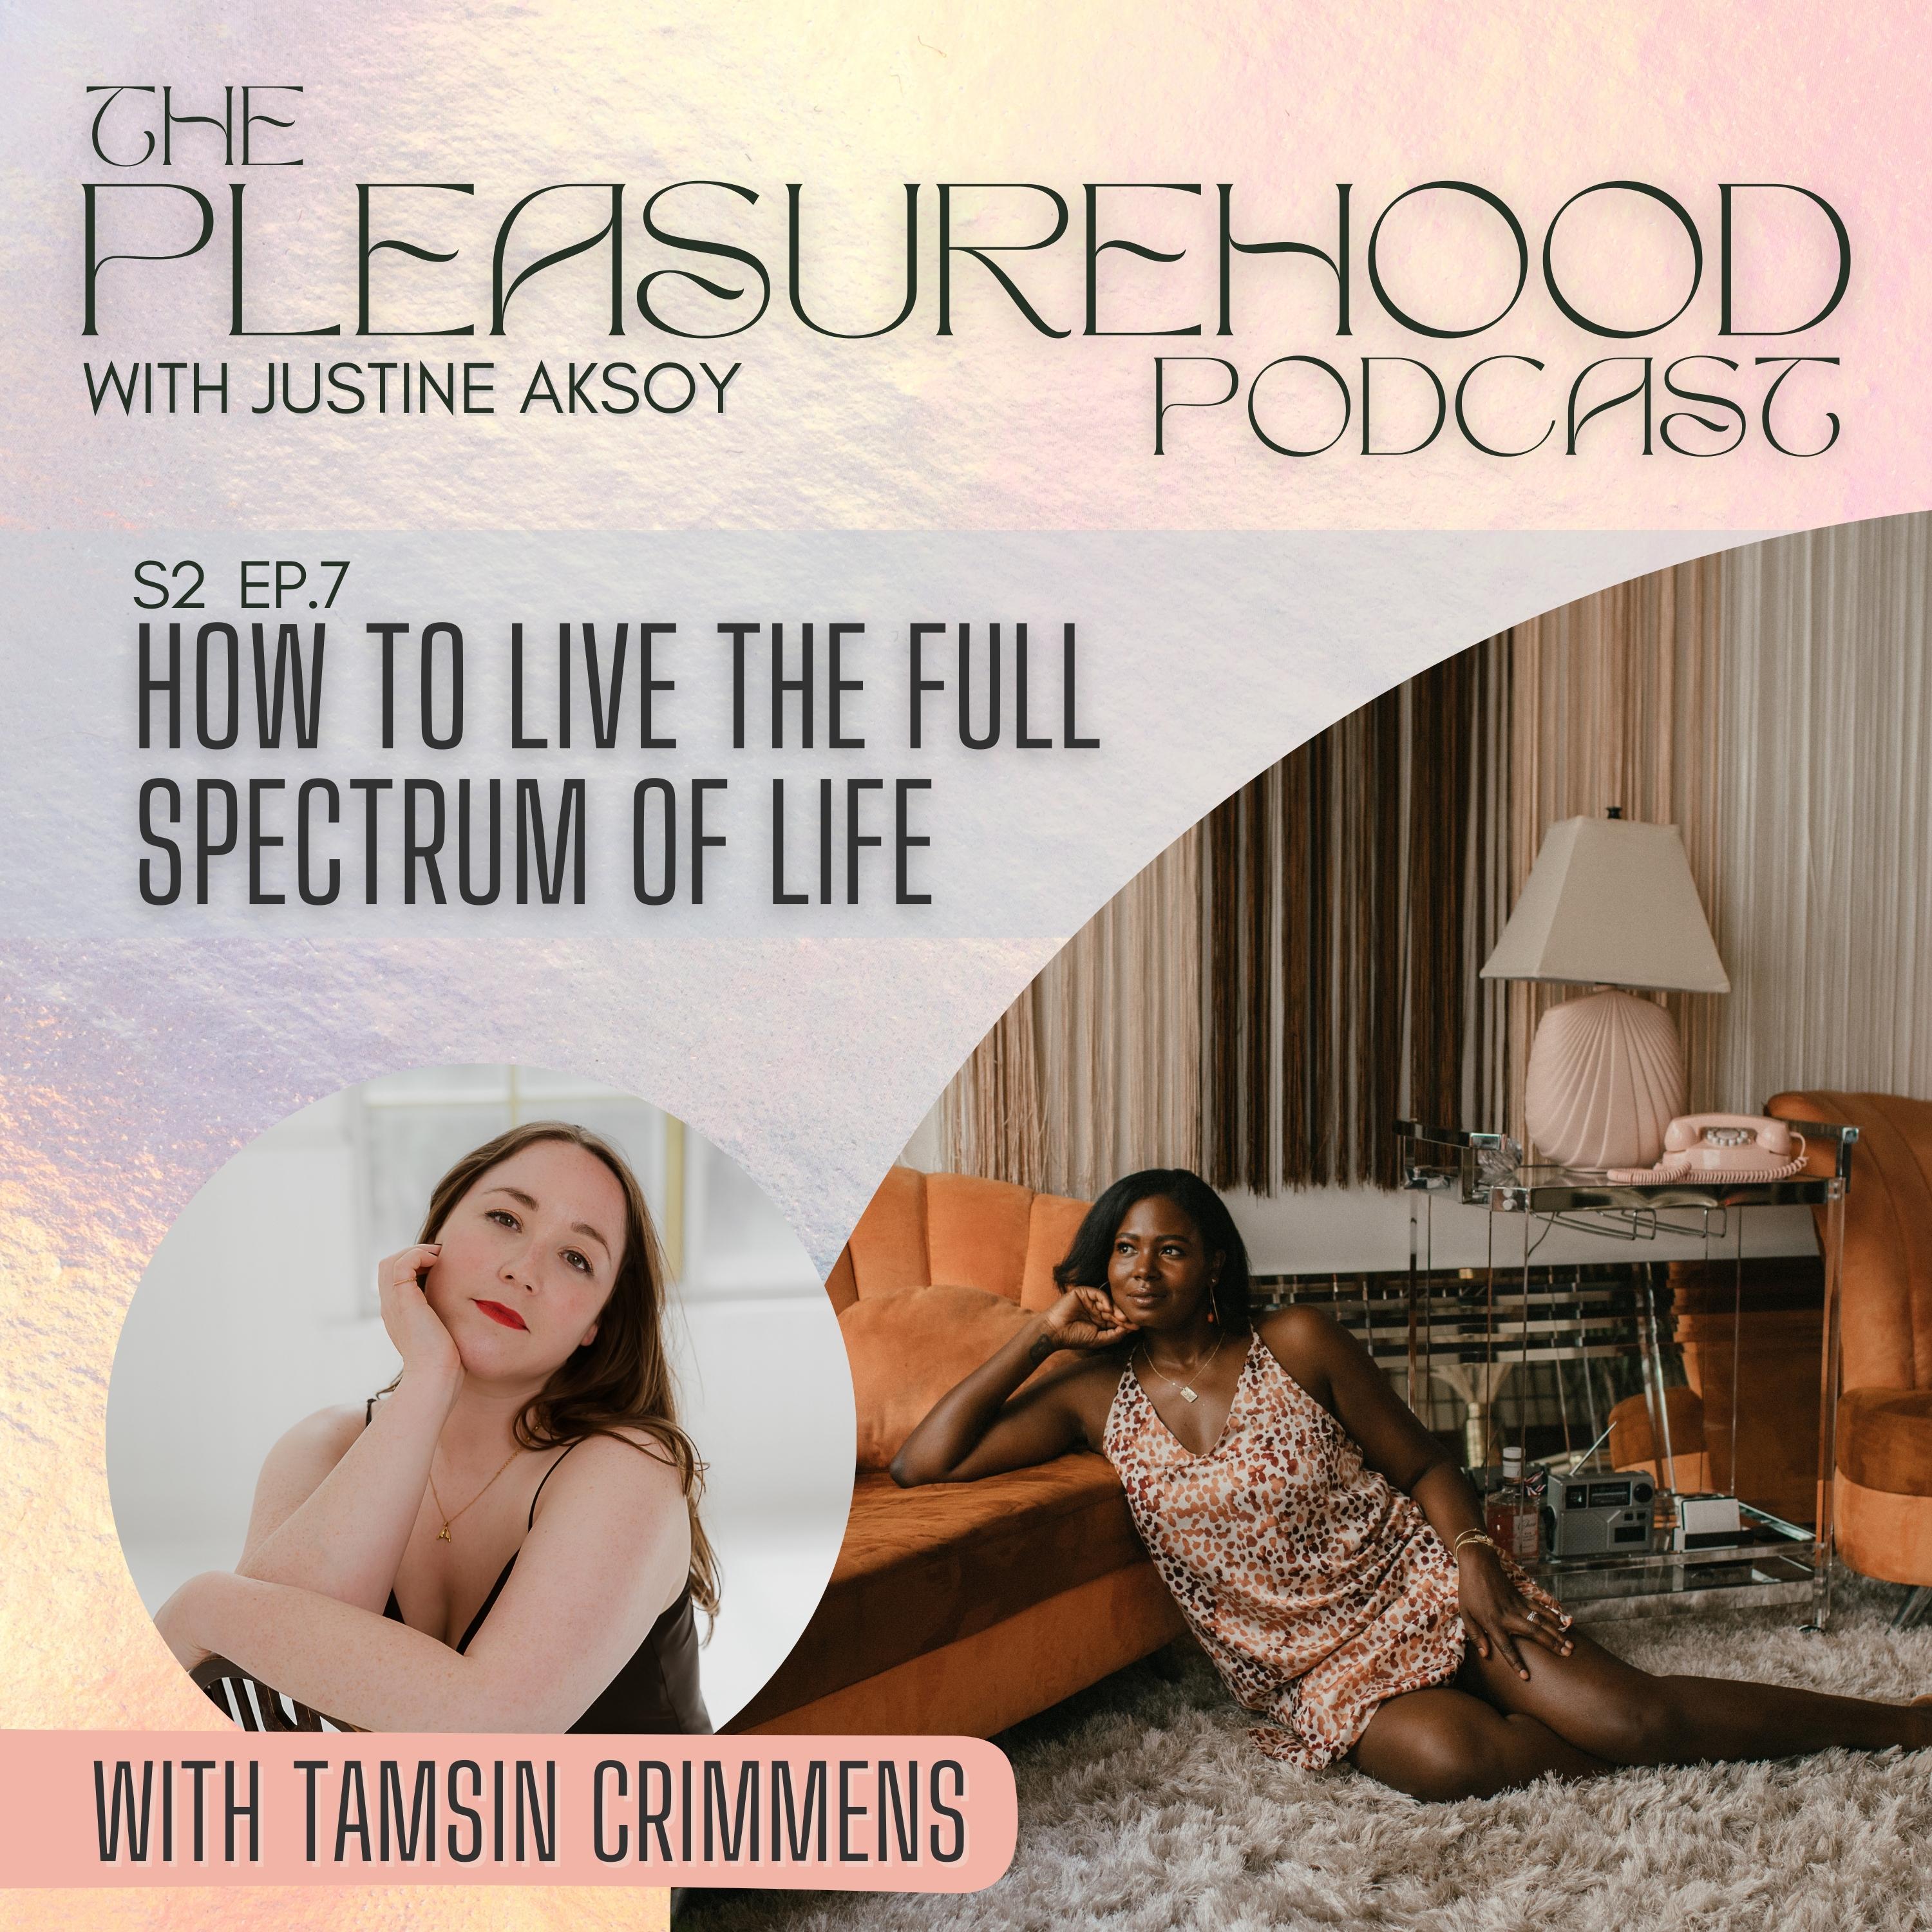 How to Live the Full Spectrum of Life, with Tamsin Crimmens